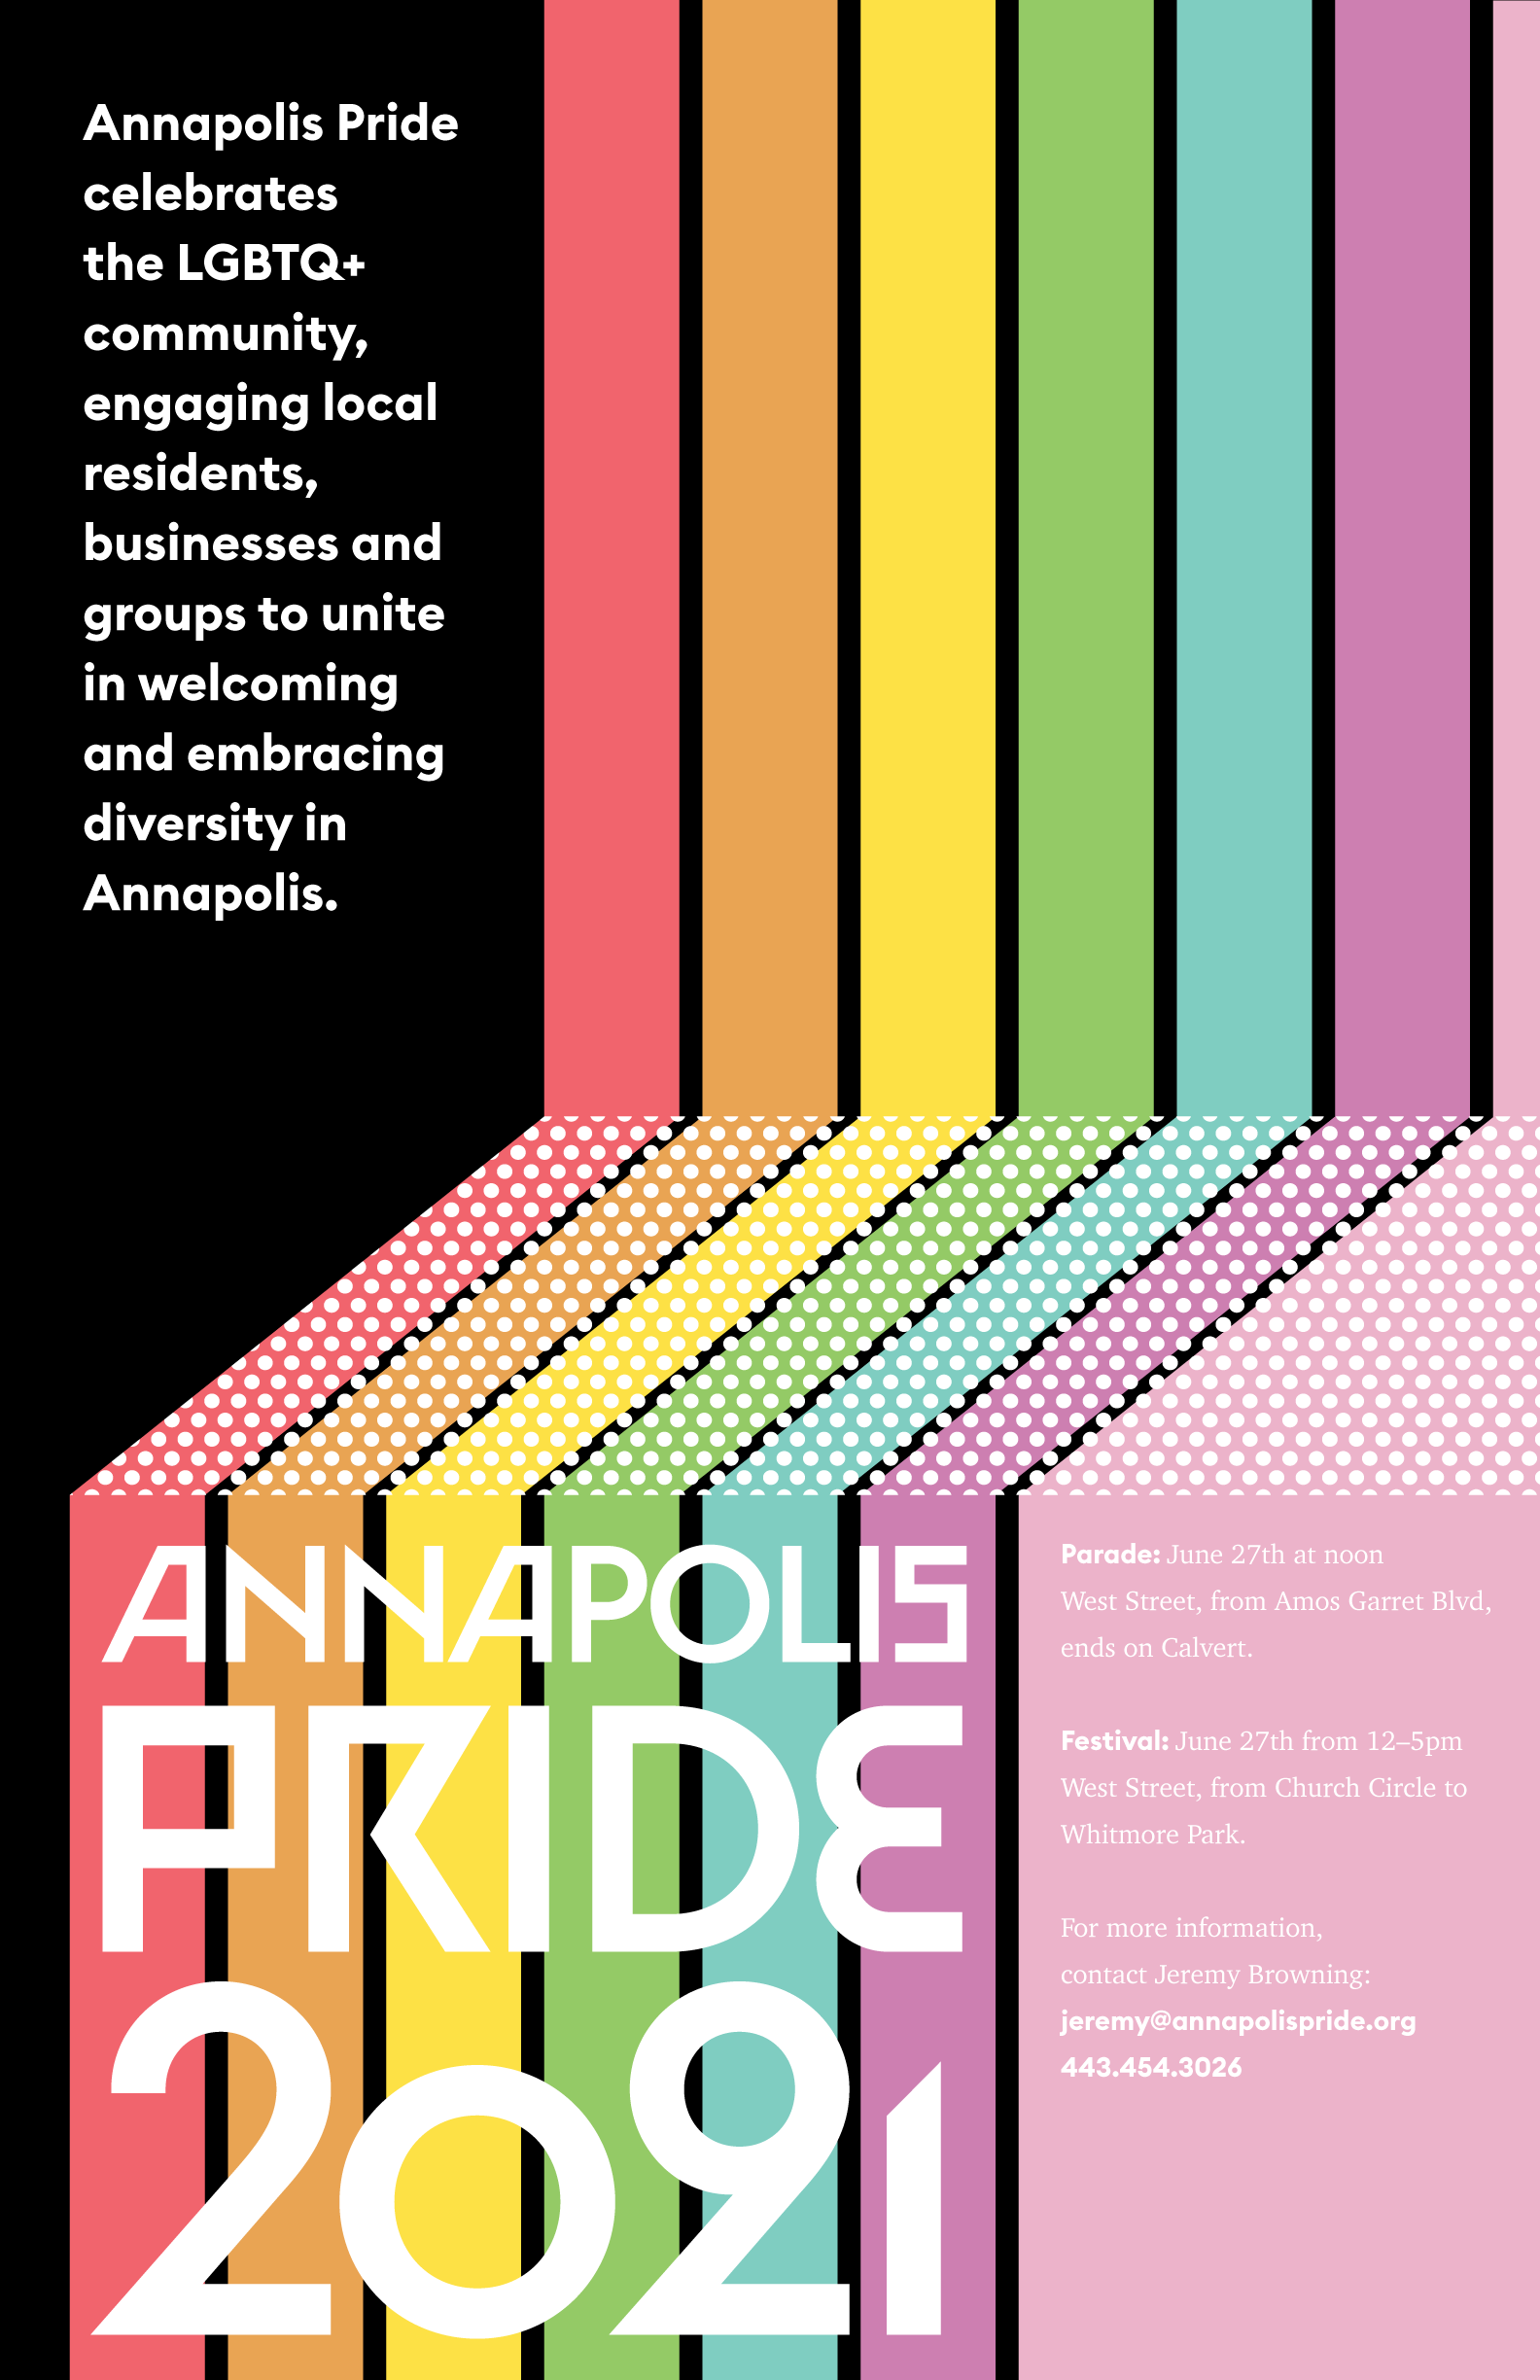 A slightly different variation of the previous poster, featuring a stark black background, with the same white dot pattern on the flat section of the rainbow instead.